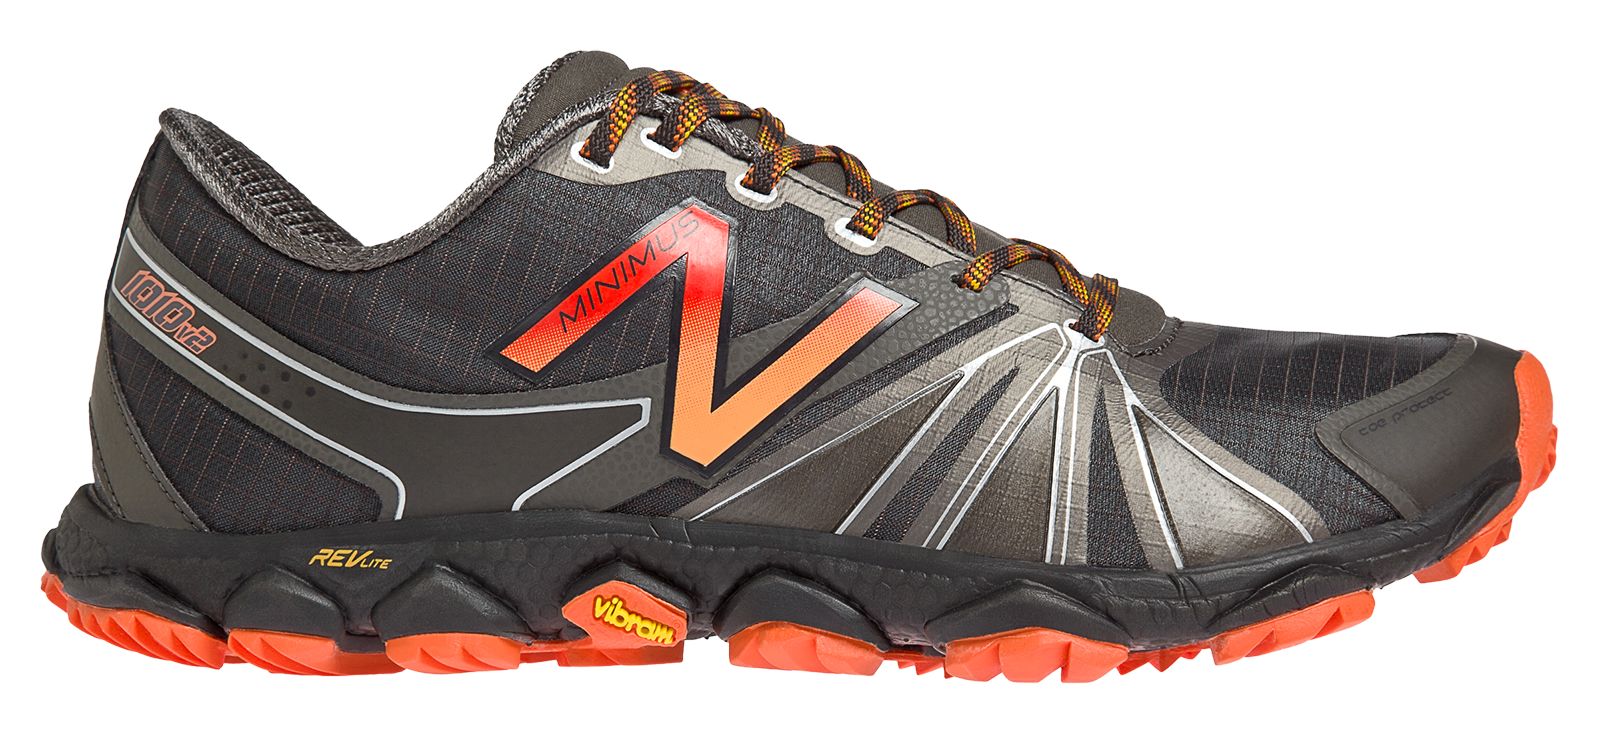 Celo traductor Minimizar New Balance Minimus 1010v2 - Review - Trail And Ultra RunningTrail And  Ultra Running 